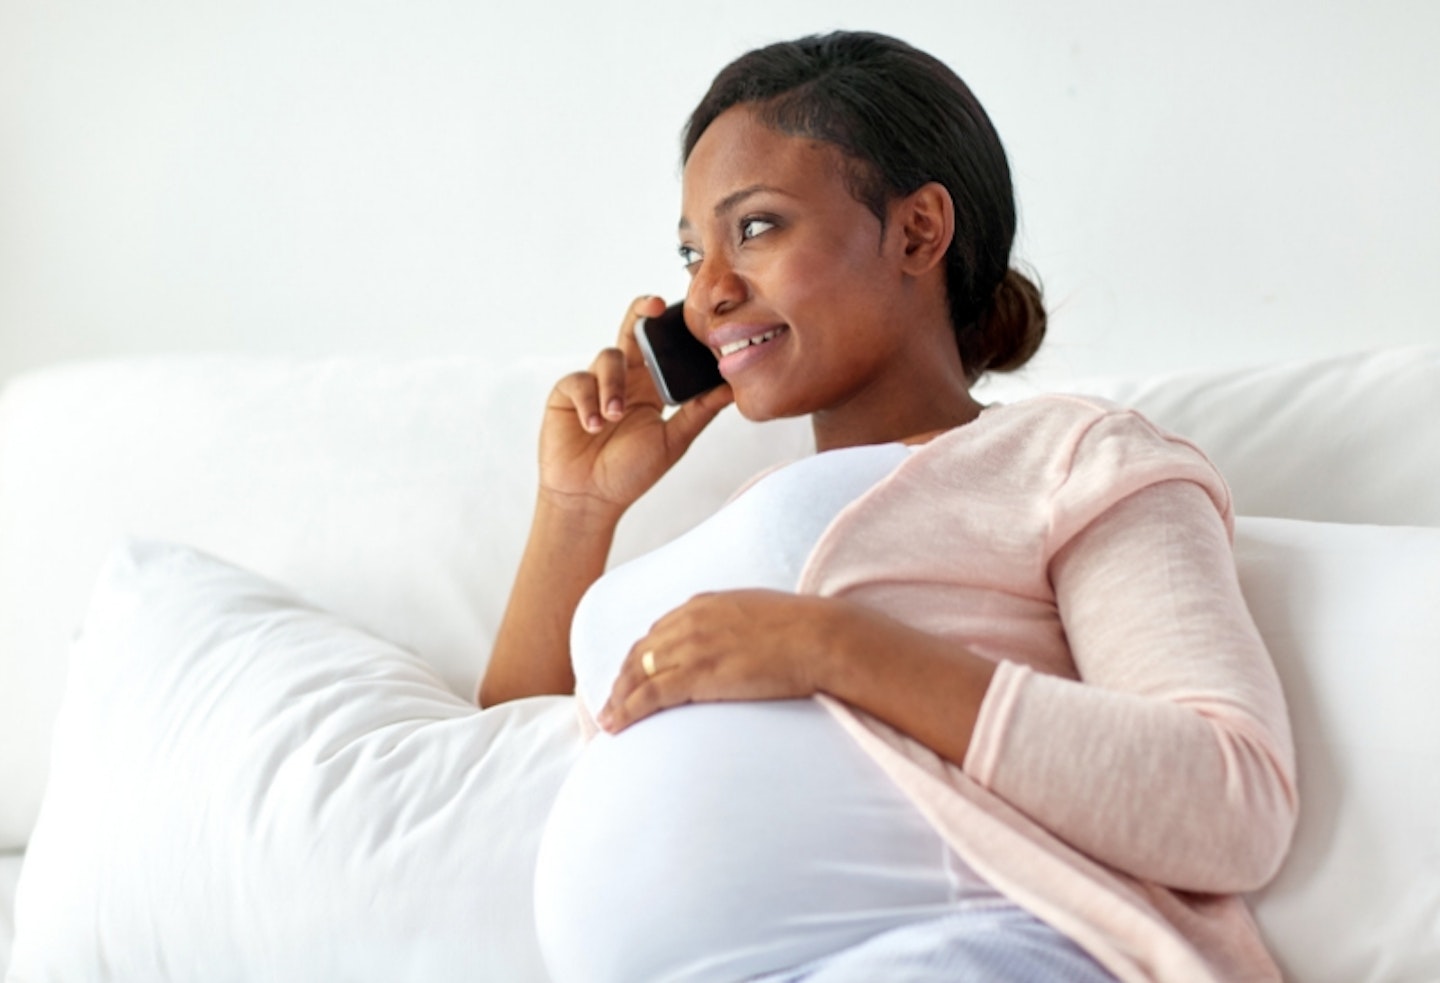 Pregnant woman sitting on a sofa on the phone